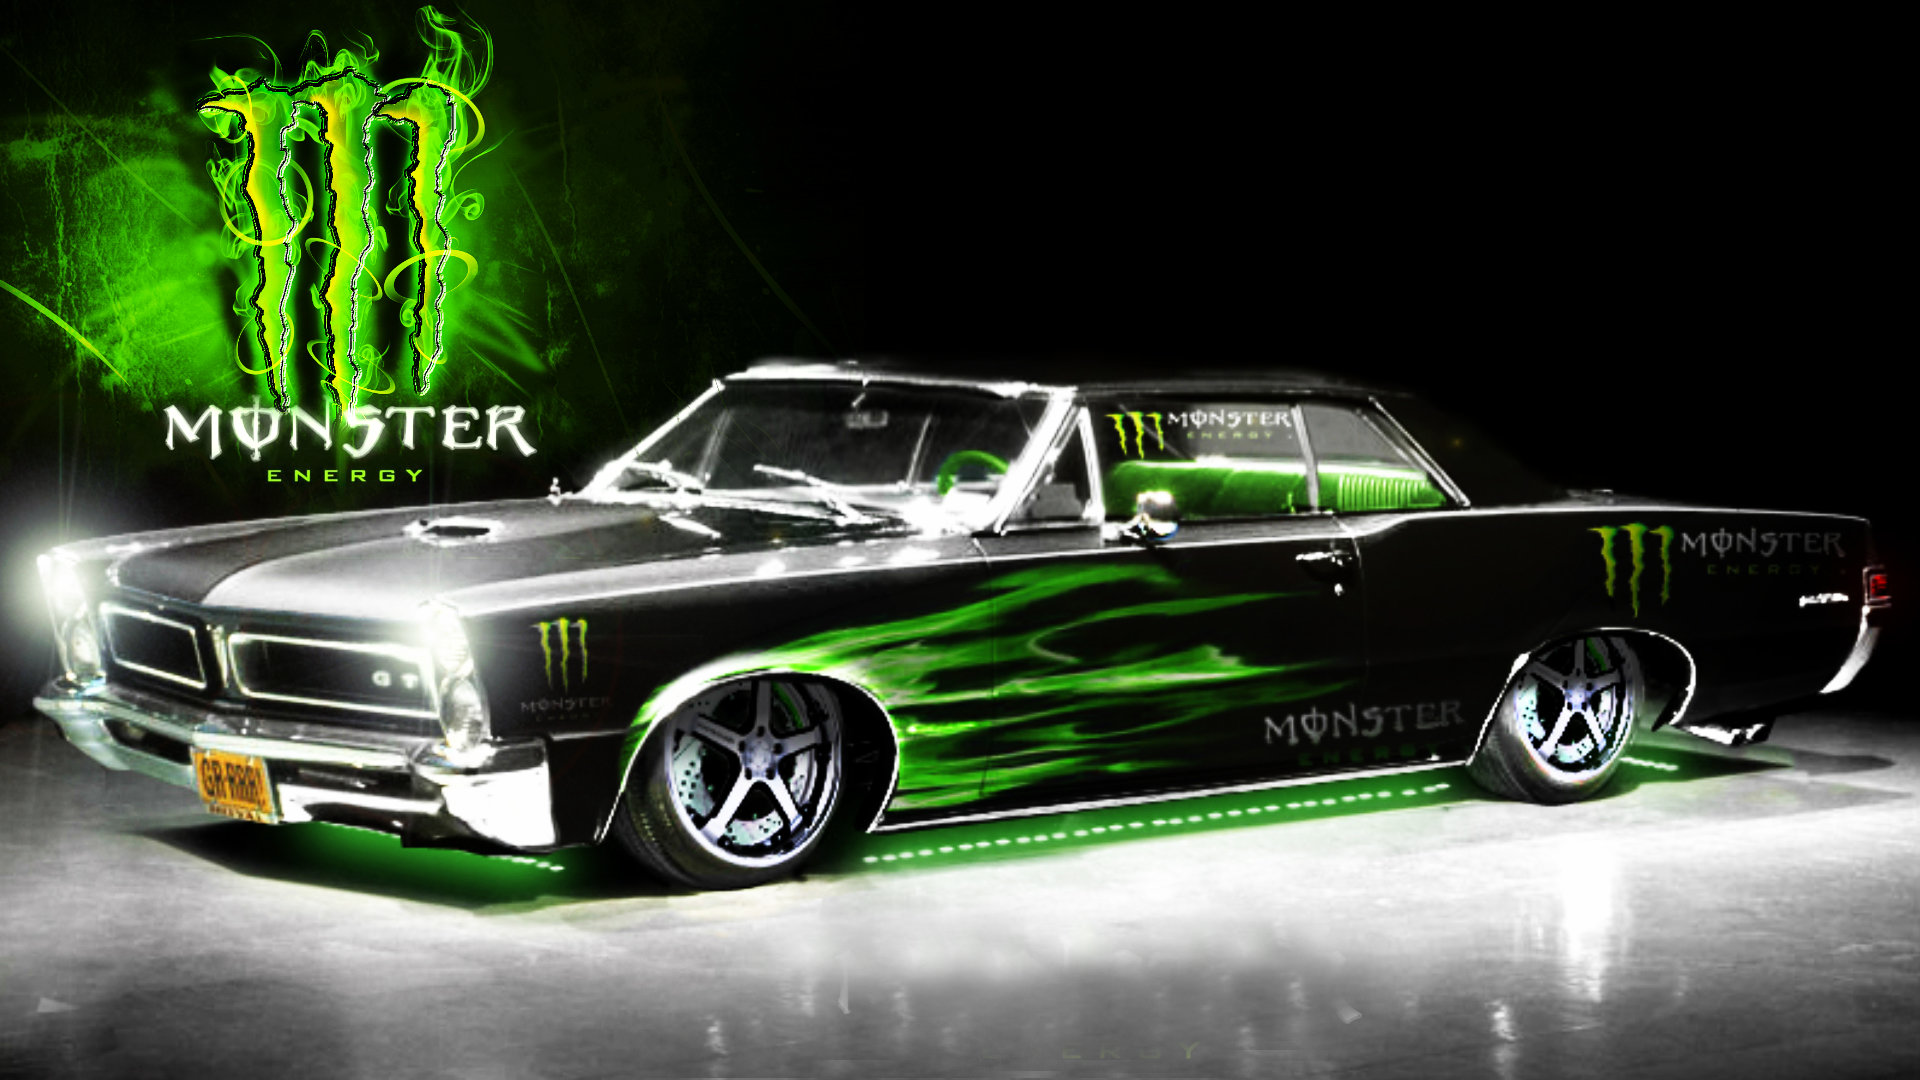 Free Download Monster Energy Wallpaper Id - Monster Energy Wallpaper Hd - HD Wallpaper 